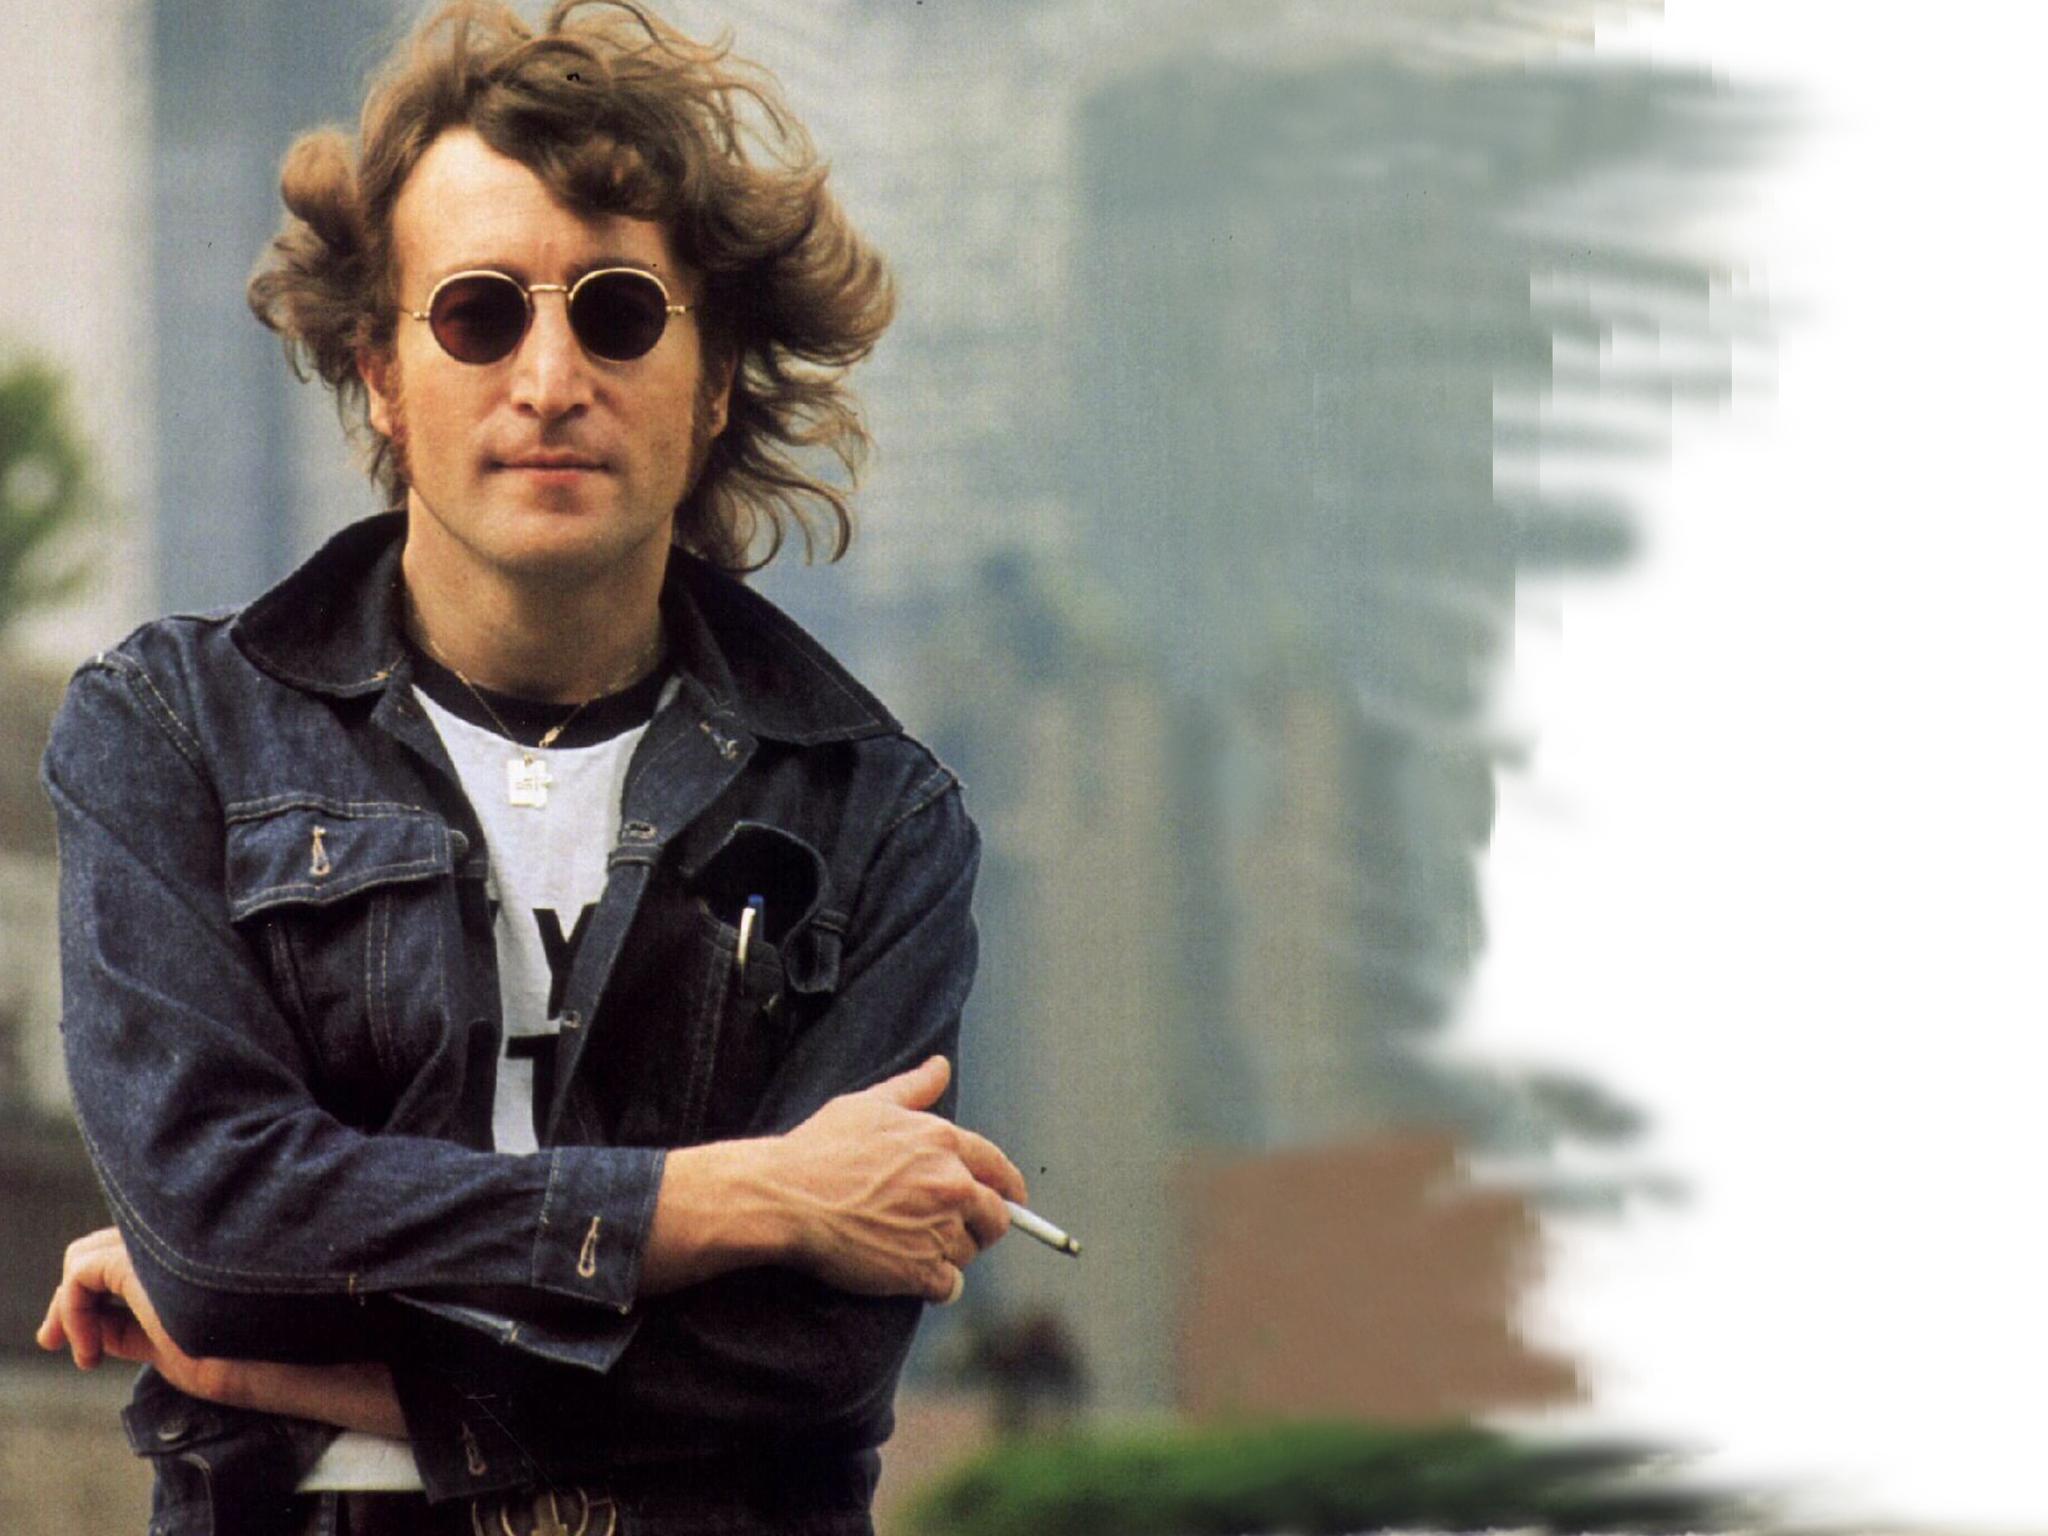 John Lennon’s Grammy Trustee Award Expected To Fetch Up To $500K At Auction